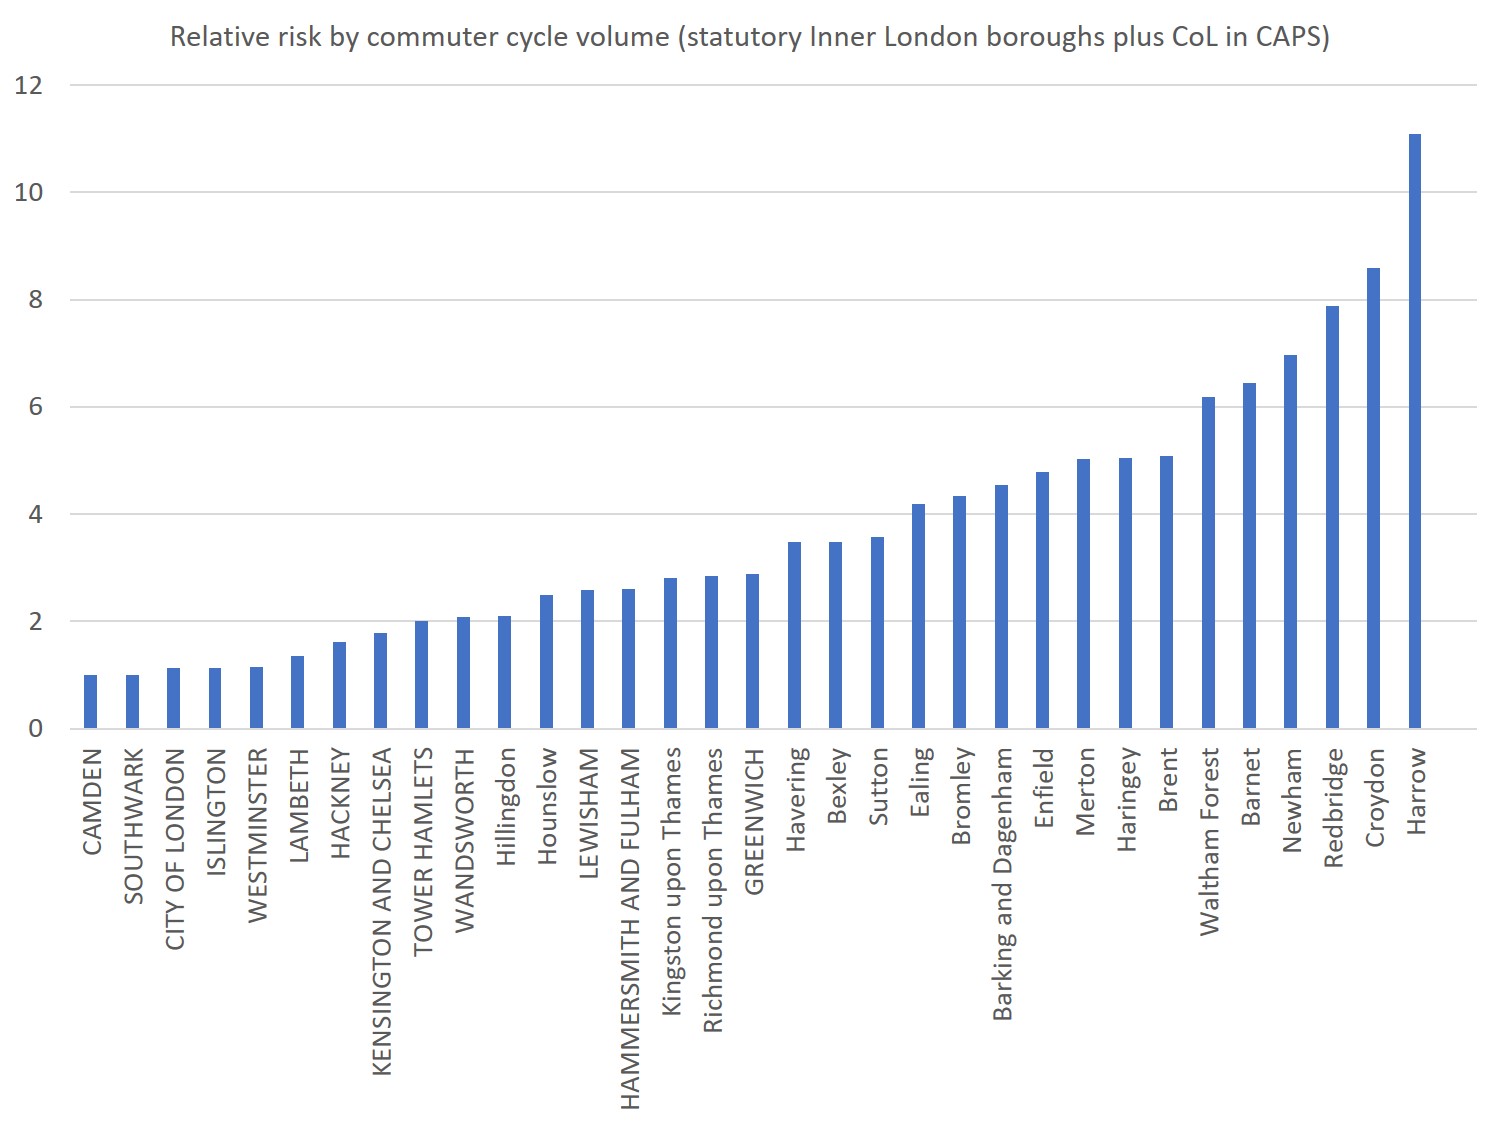 Comparing relative risks by borough (Camden, with the lowest risk, set to 1)